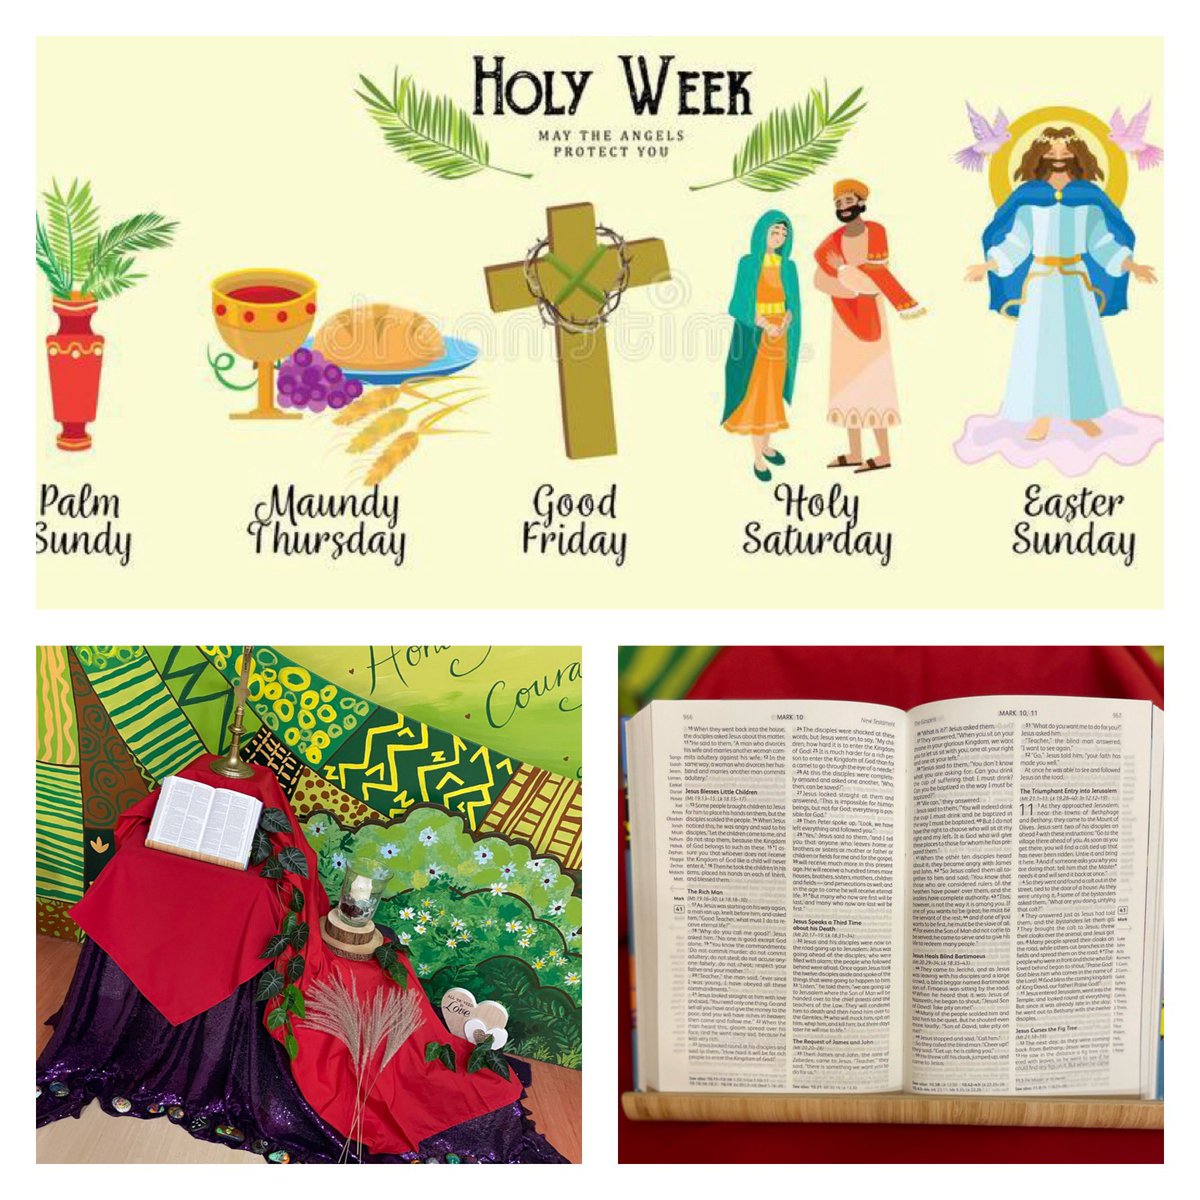 It’s Holy Week and we look for the positives in all we encounter. We focus on God’s great work and help others to flourish through our words and actions 🙏🏼💚 🕊️ @ALPSITnews